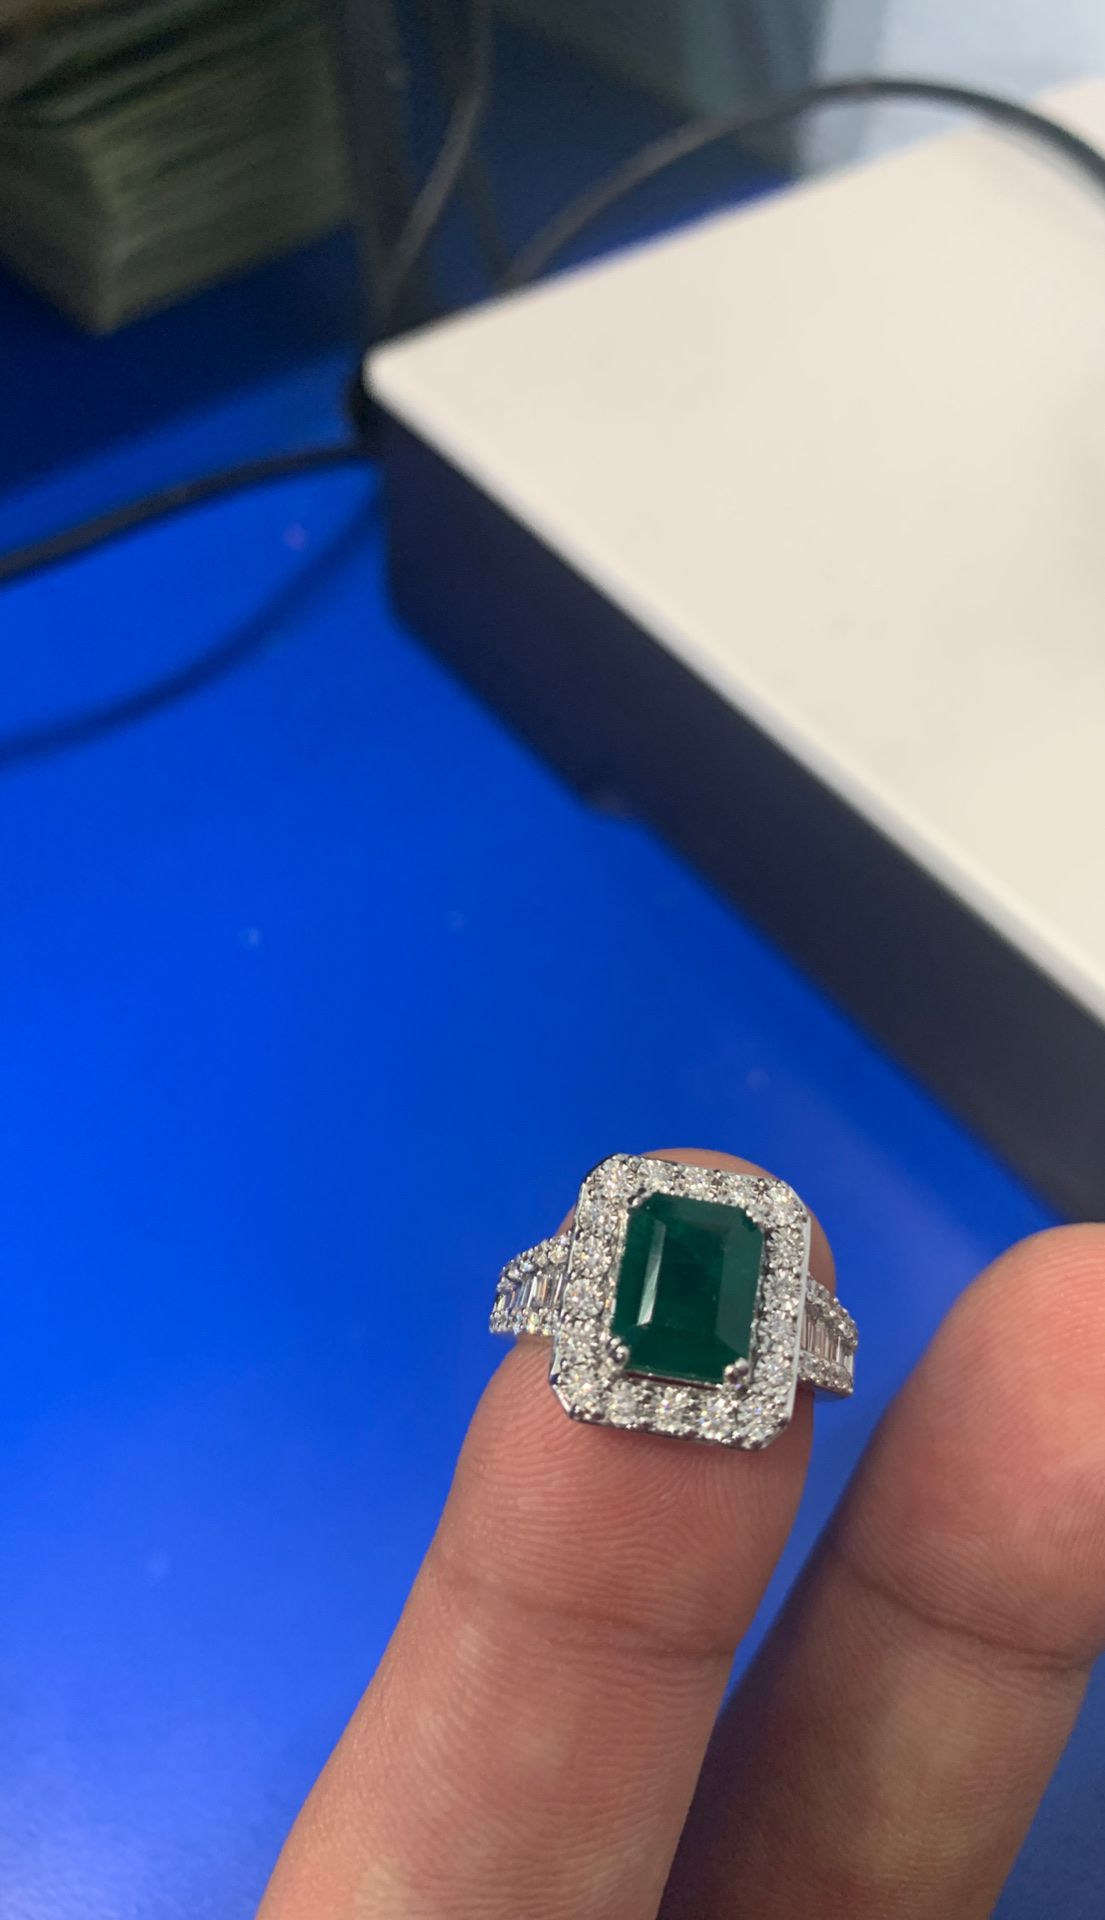 Large center Emerald with diamond baguettes